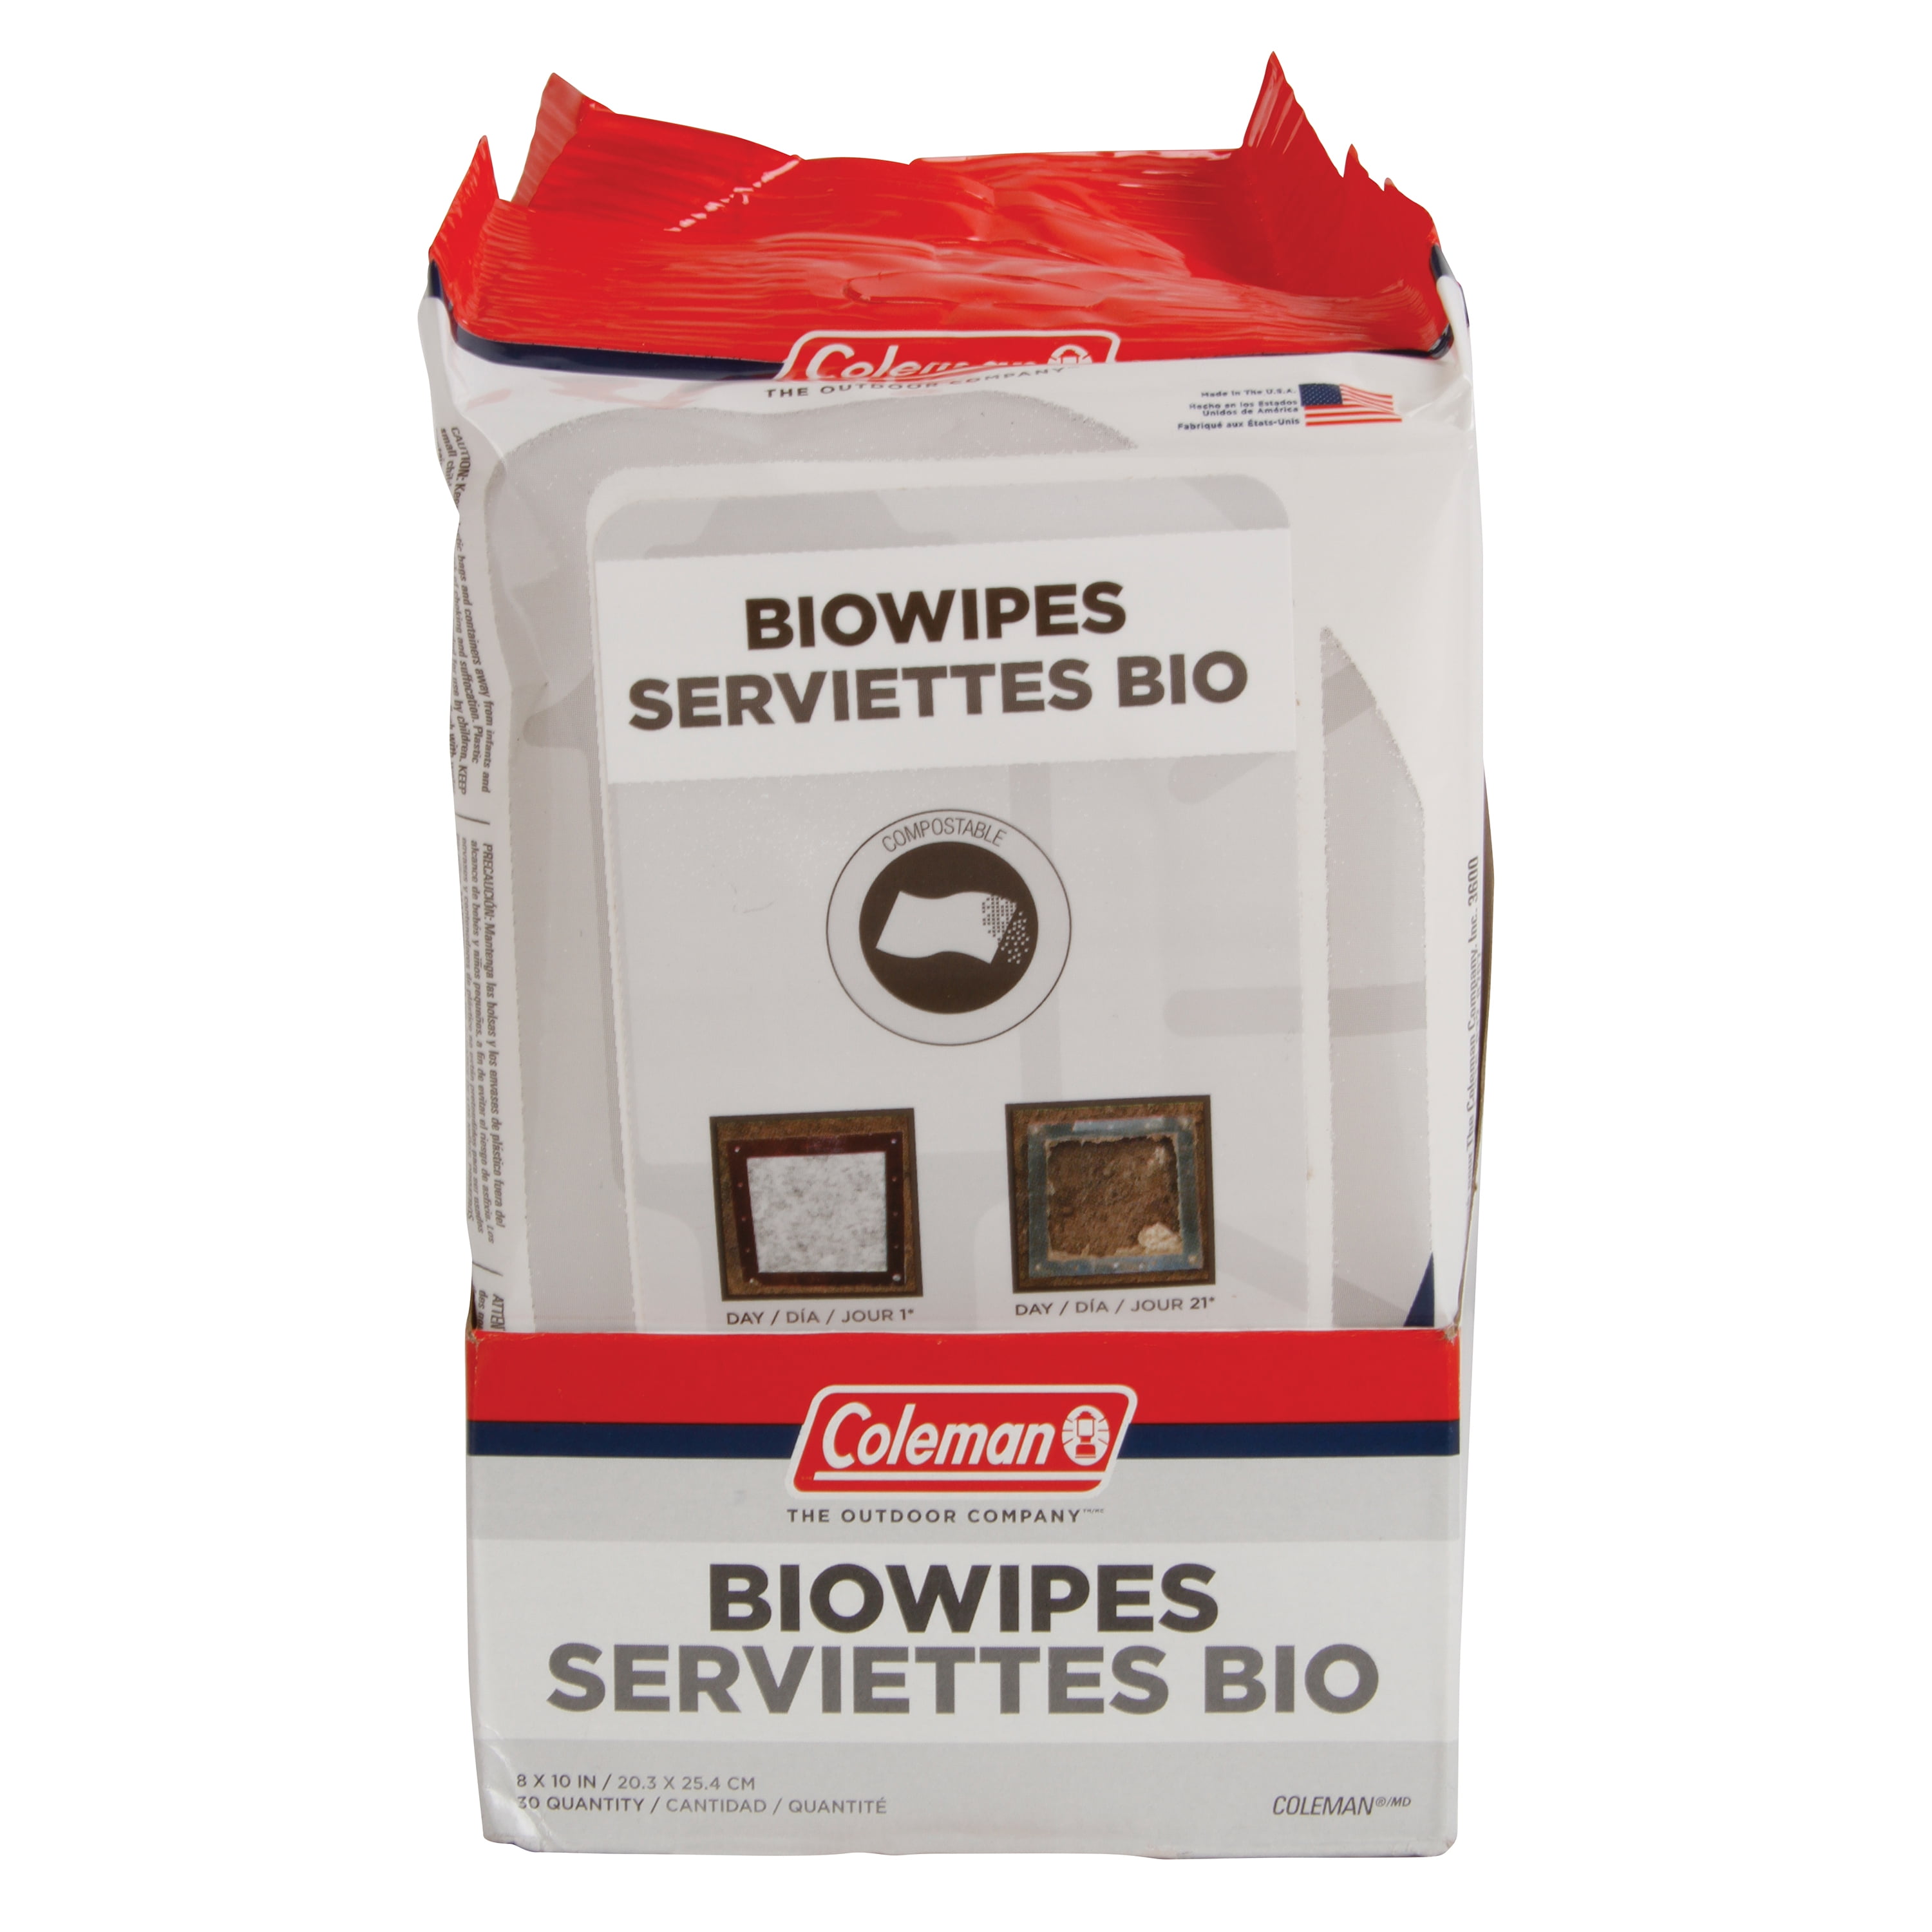 Bio Wipies Biodegradable Baby Wipes Pack of 72 Valor Brands BIOWIPIES